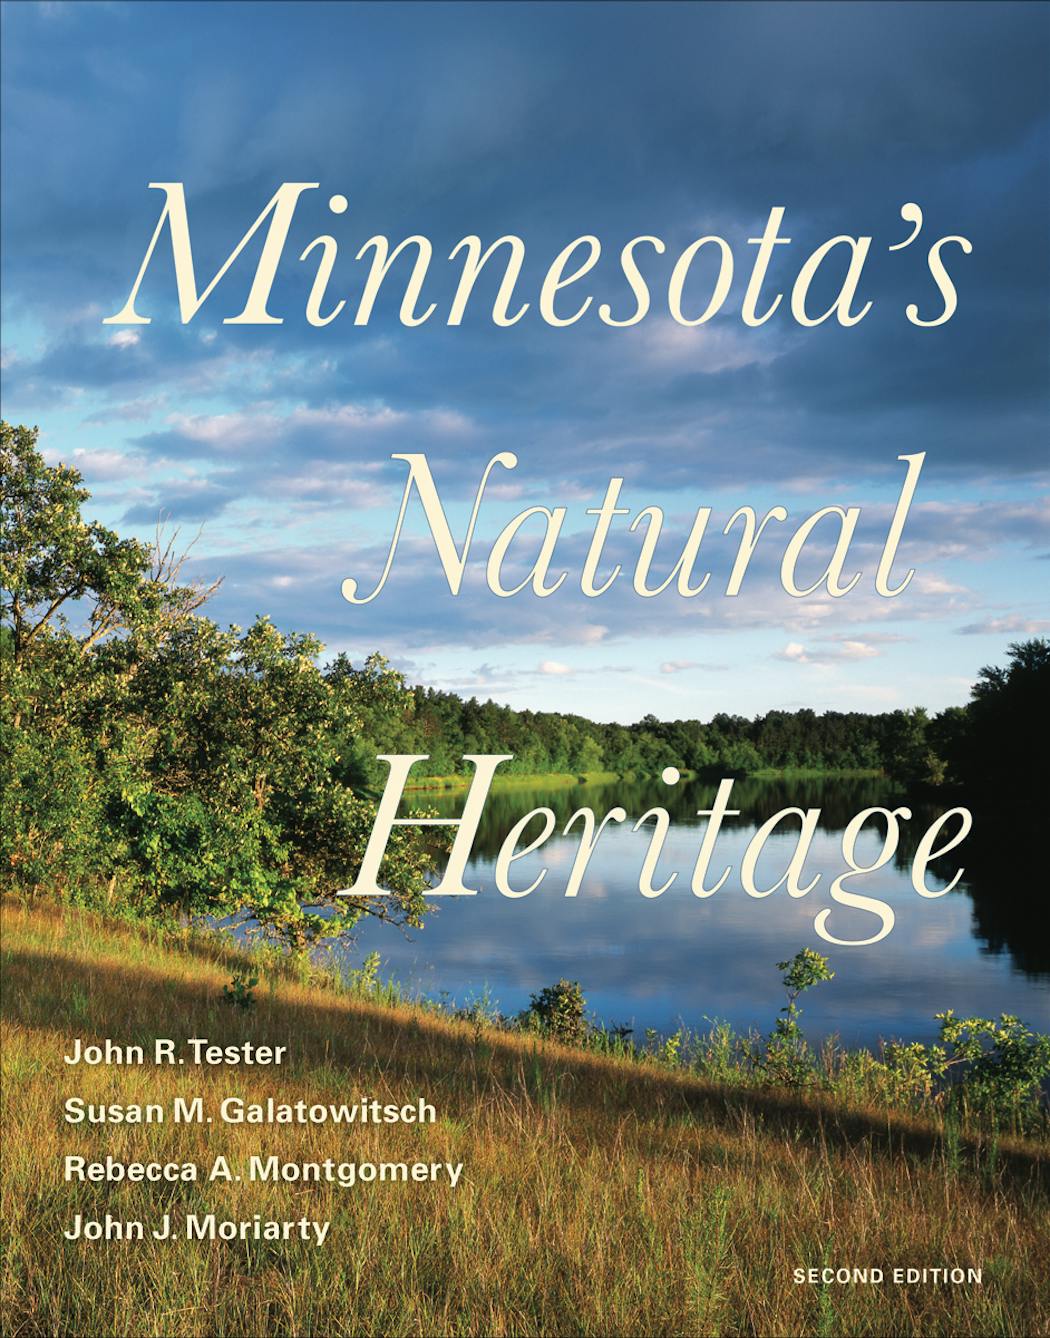 A second edition of “Minnesota’s Natural Heritage” is due Dec. 29 from University of Minnesota Press. John Tester is shown below after his book first published in 1995.